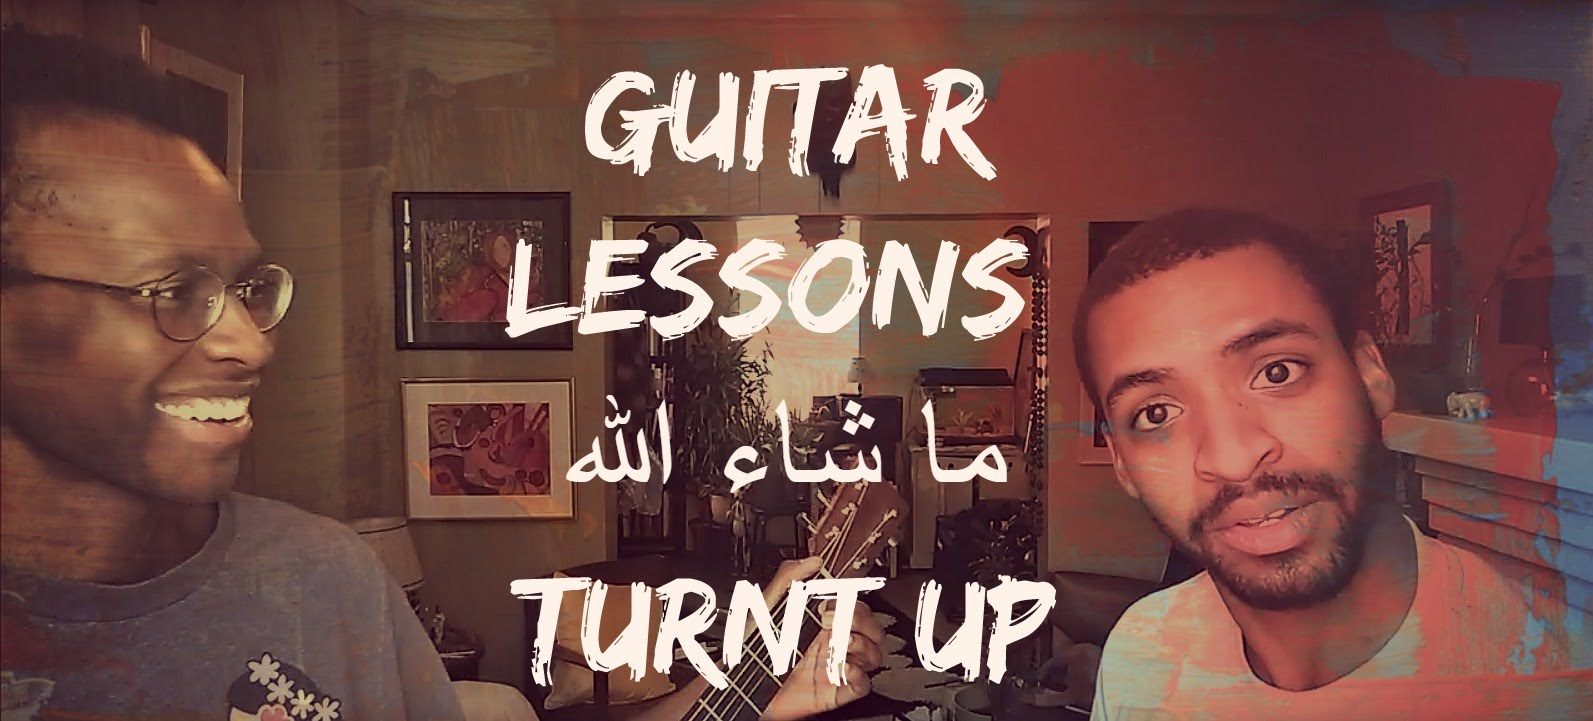 This Intelligent and Turnt Up Video Makes Learning Guitar Fun